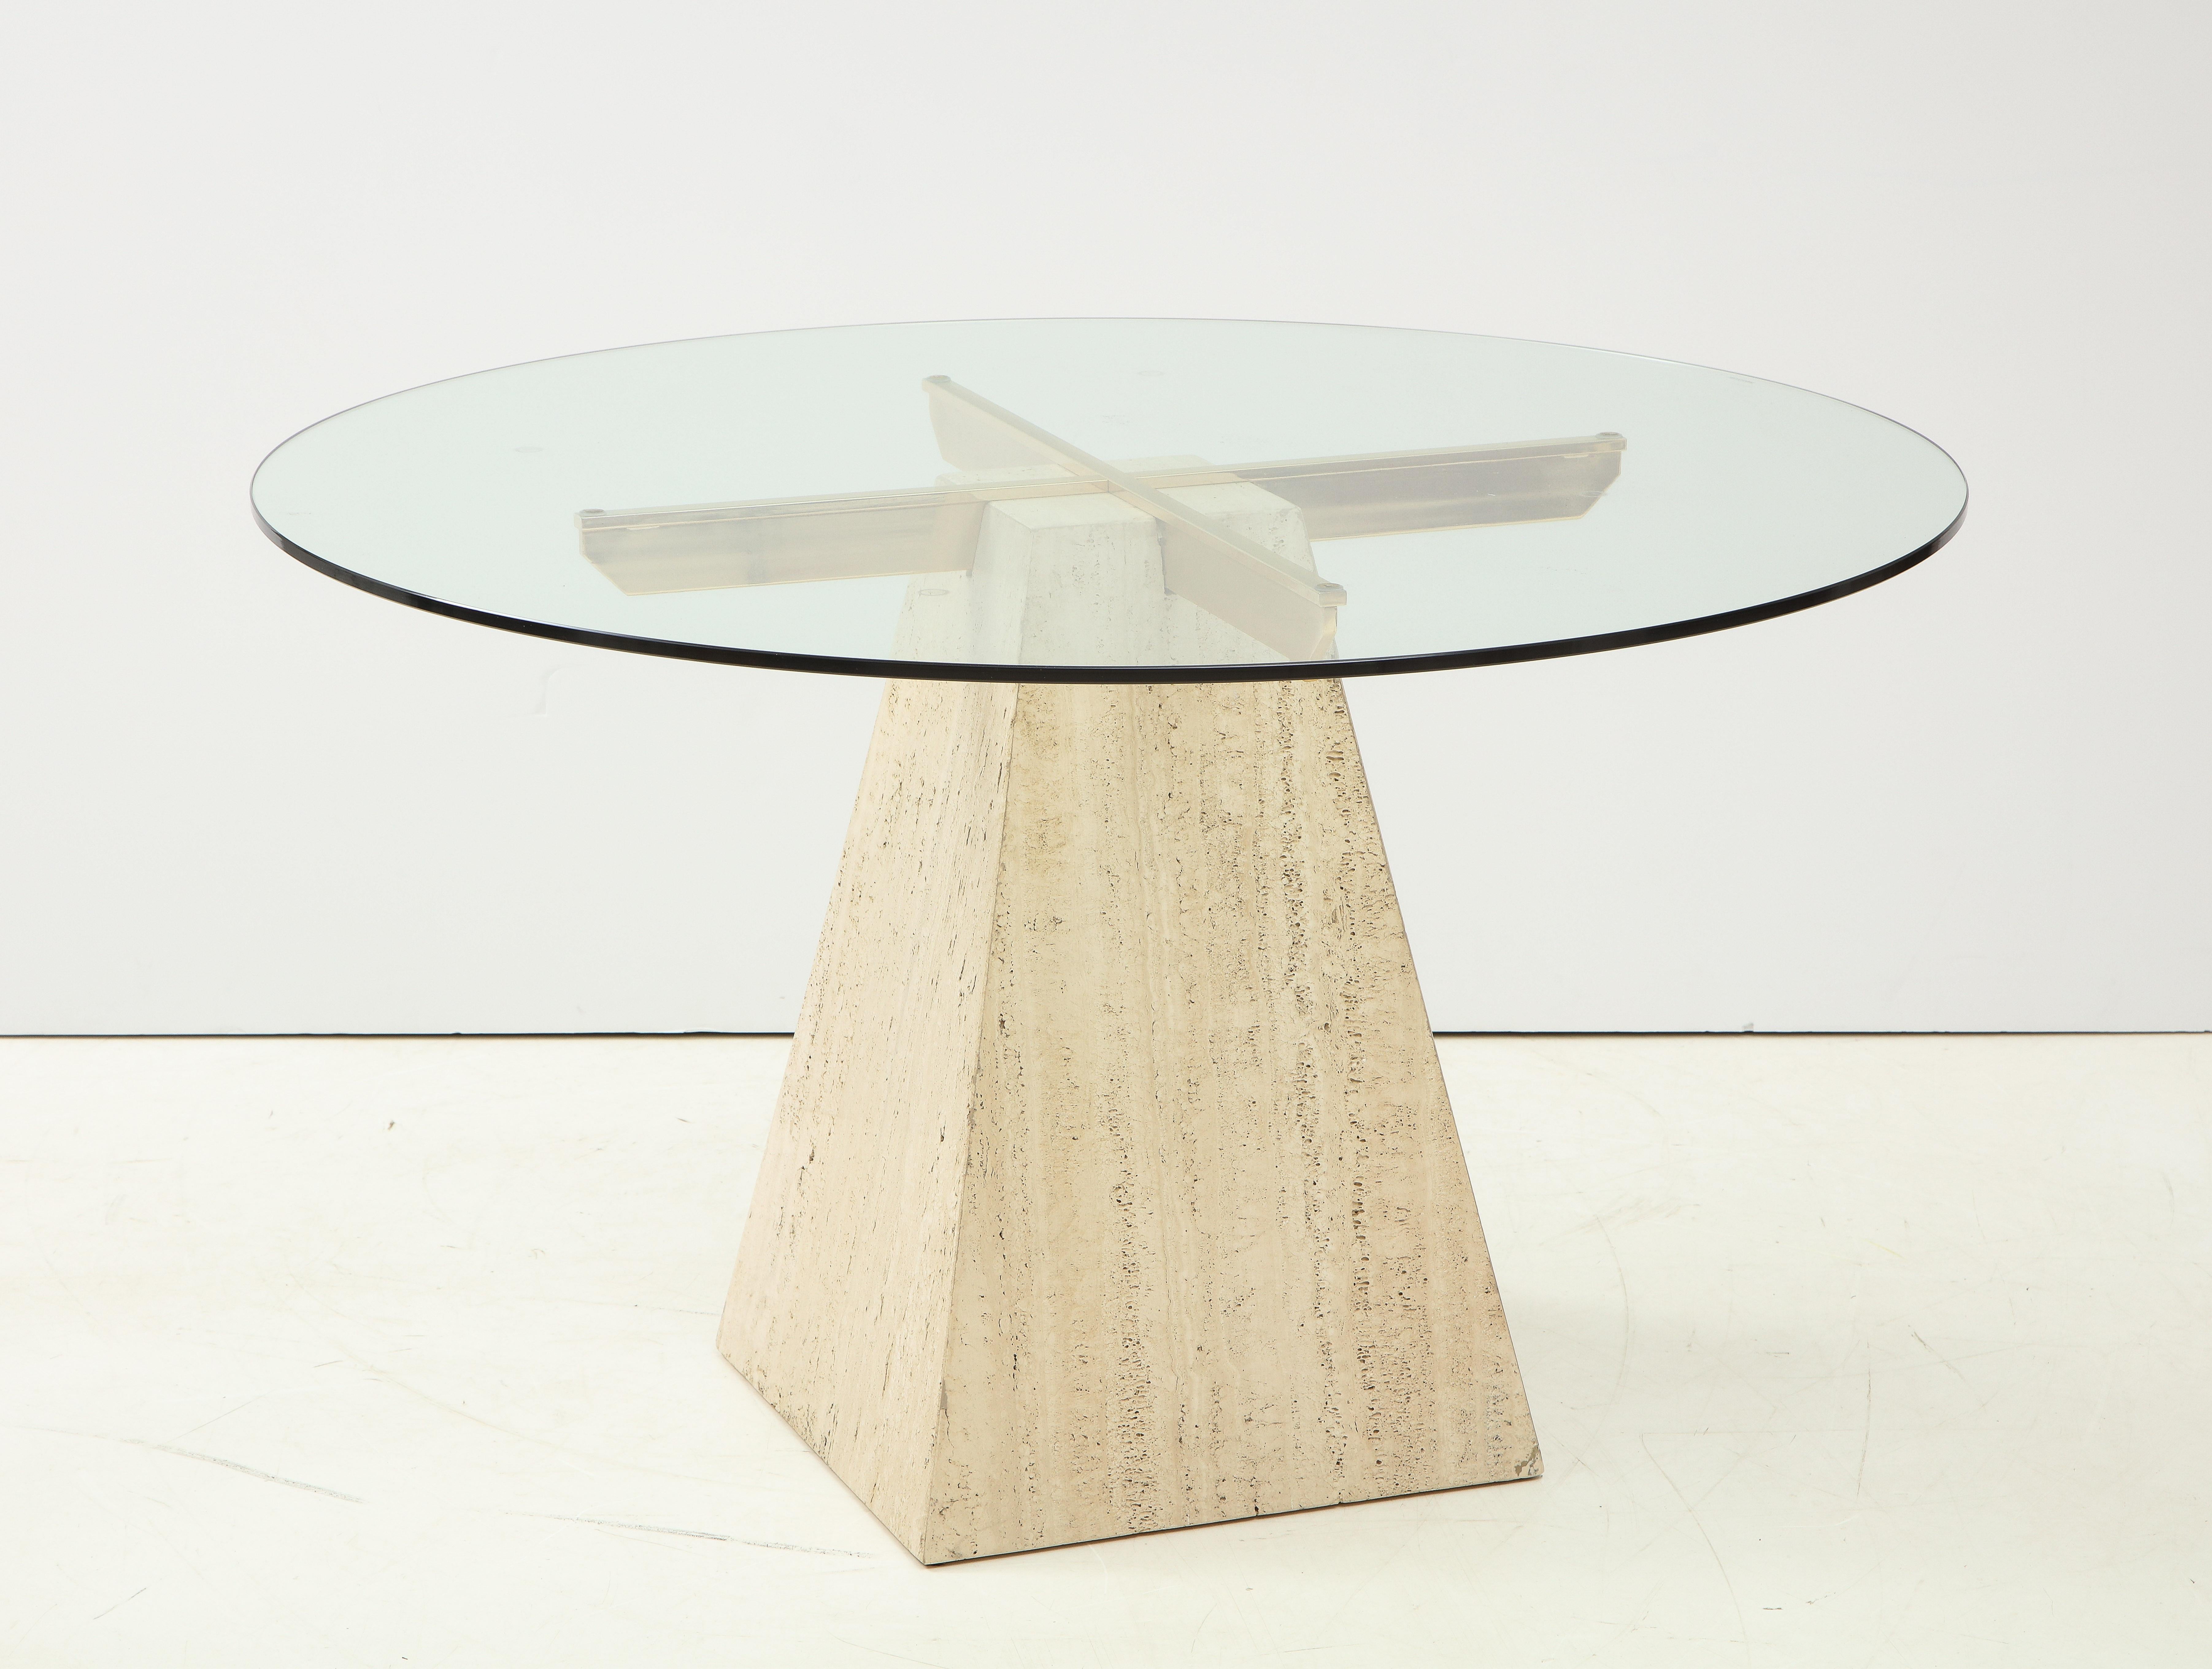 1970s Modern Italian Travertine Dining Table For Sale 2